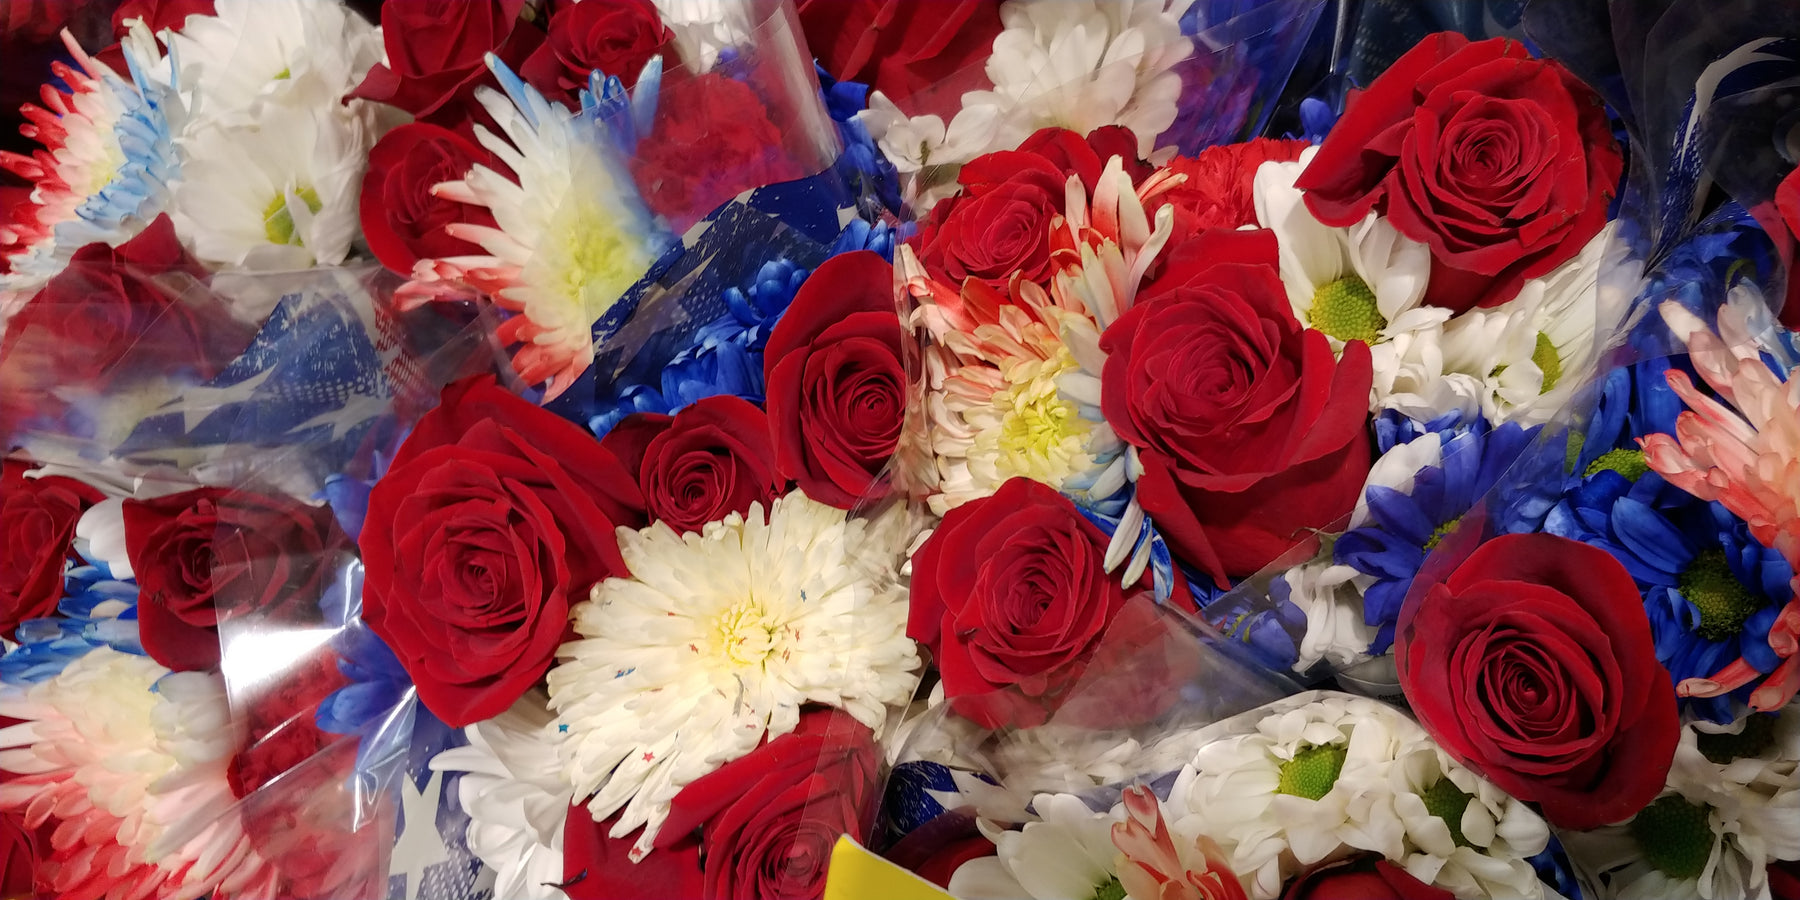 How To Make Creative 4th of July Flower Arrangements Using Silk Flowers